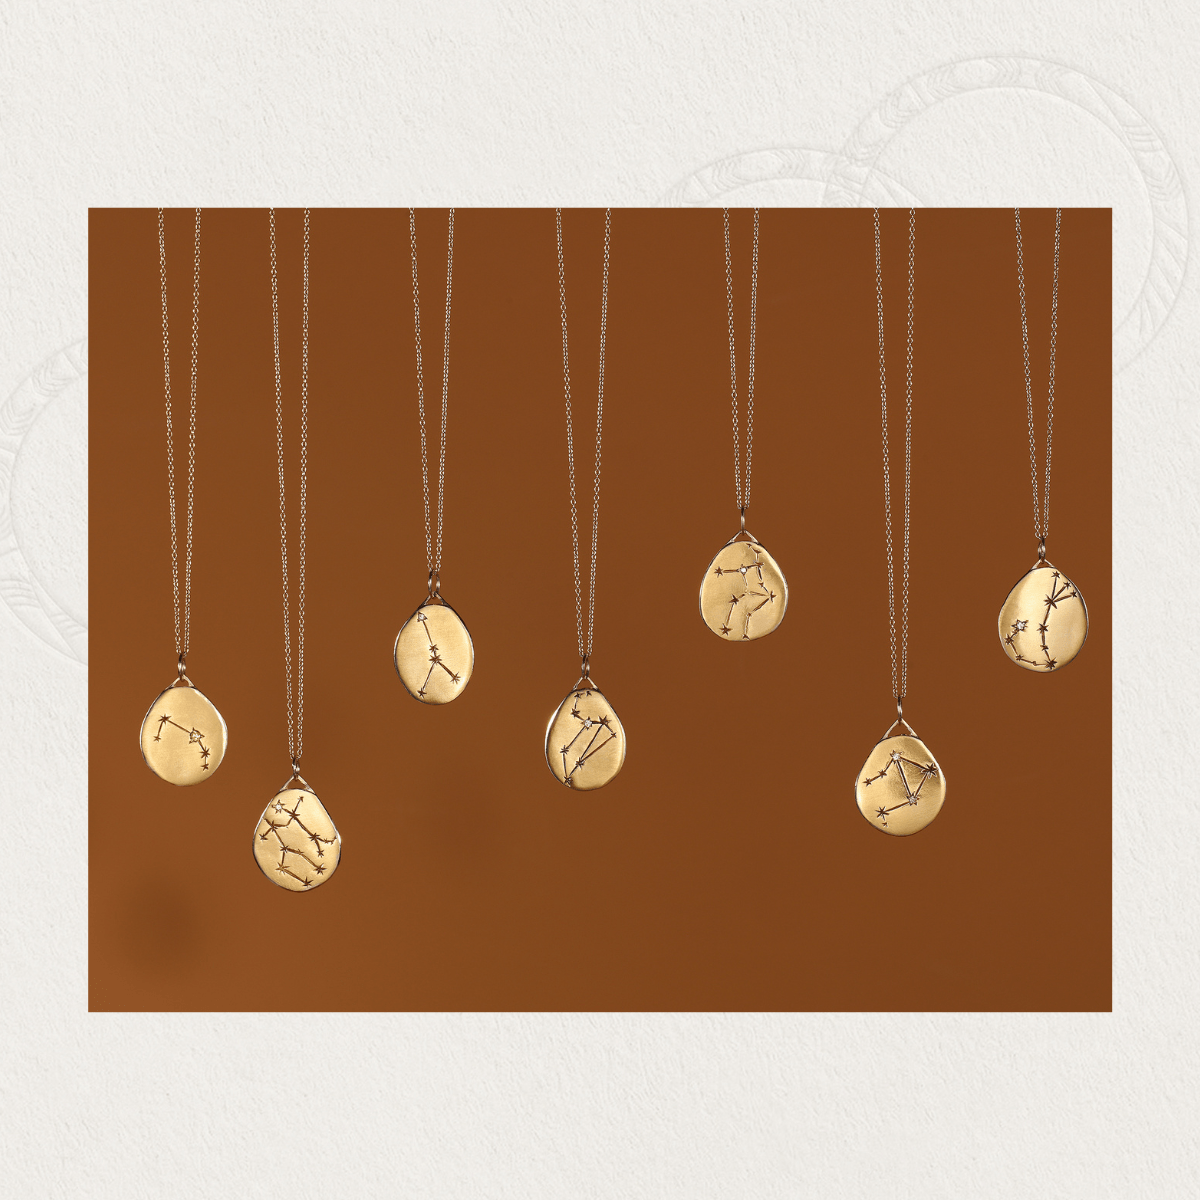 zodiac charm necklaces 14k gold charms on chains editorial image